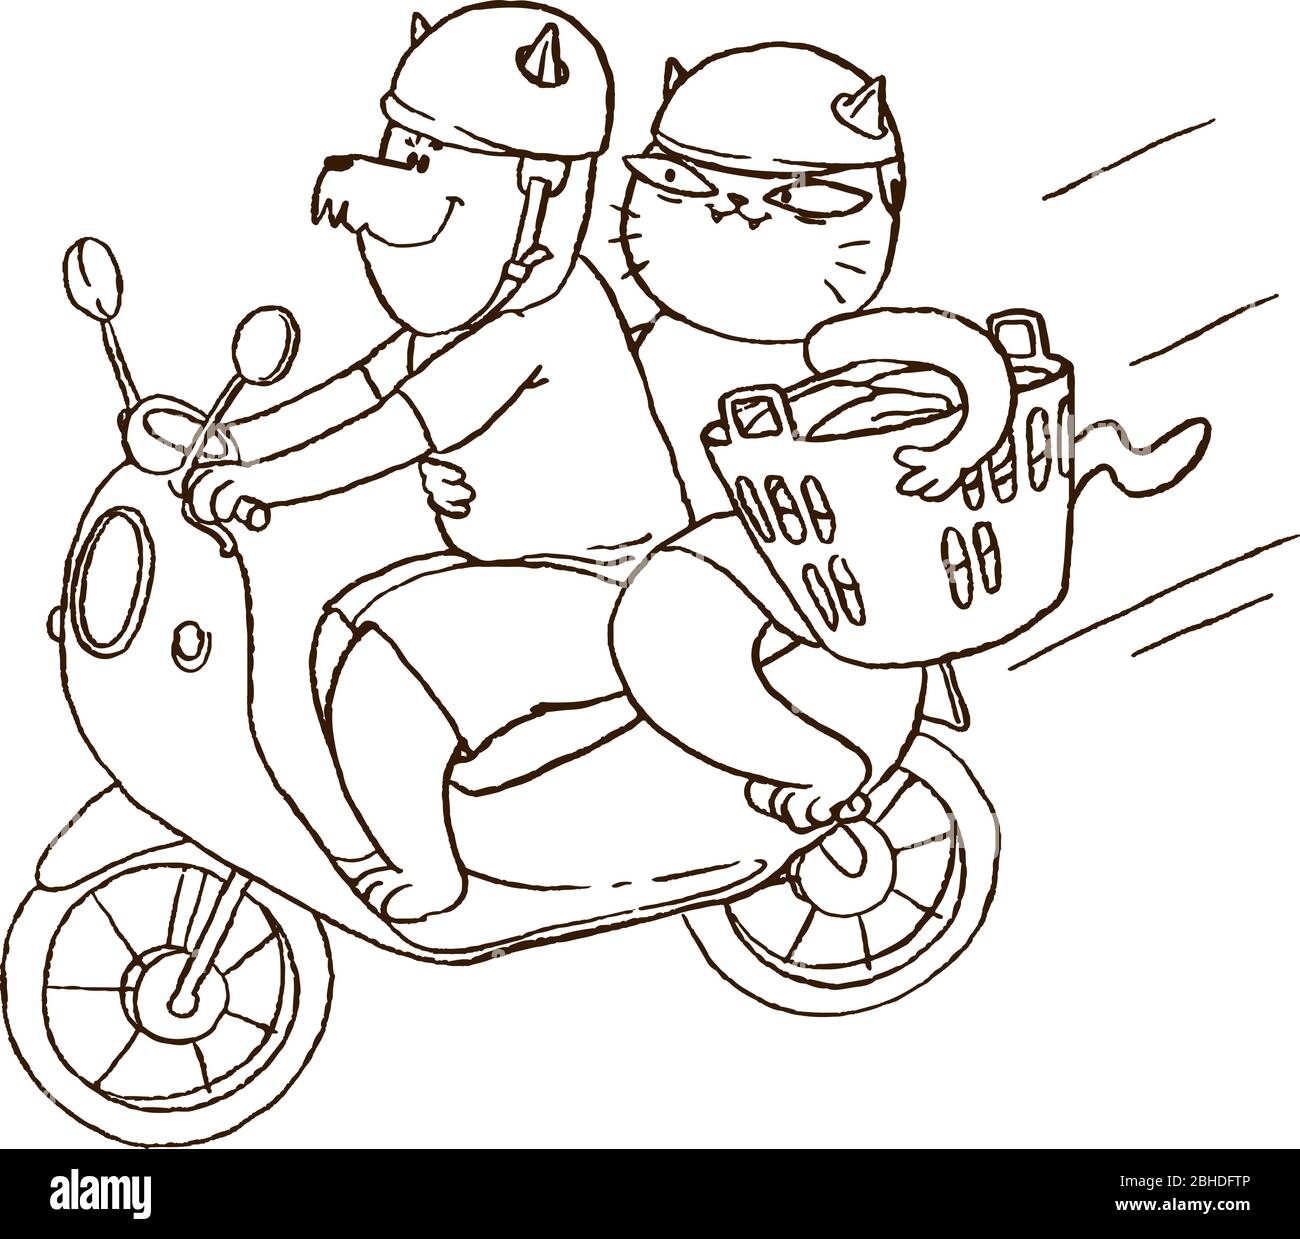 Two cartoon cats riding a bike with helmets and laundry basket. Vector outline funny illustration. Coloring book page. Stock Vector